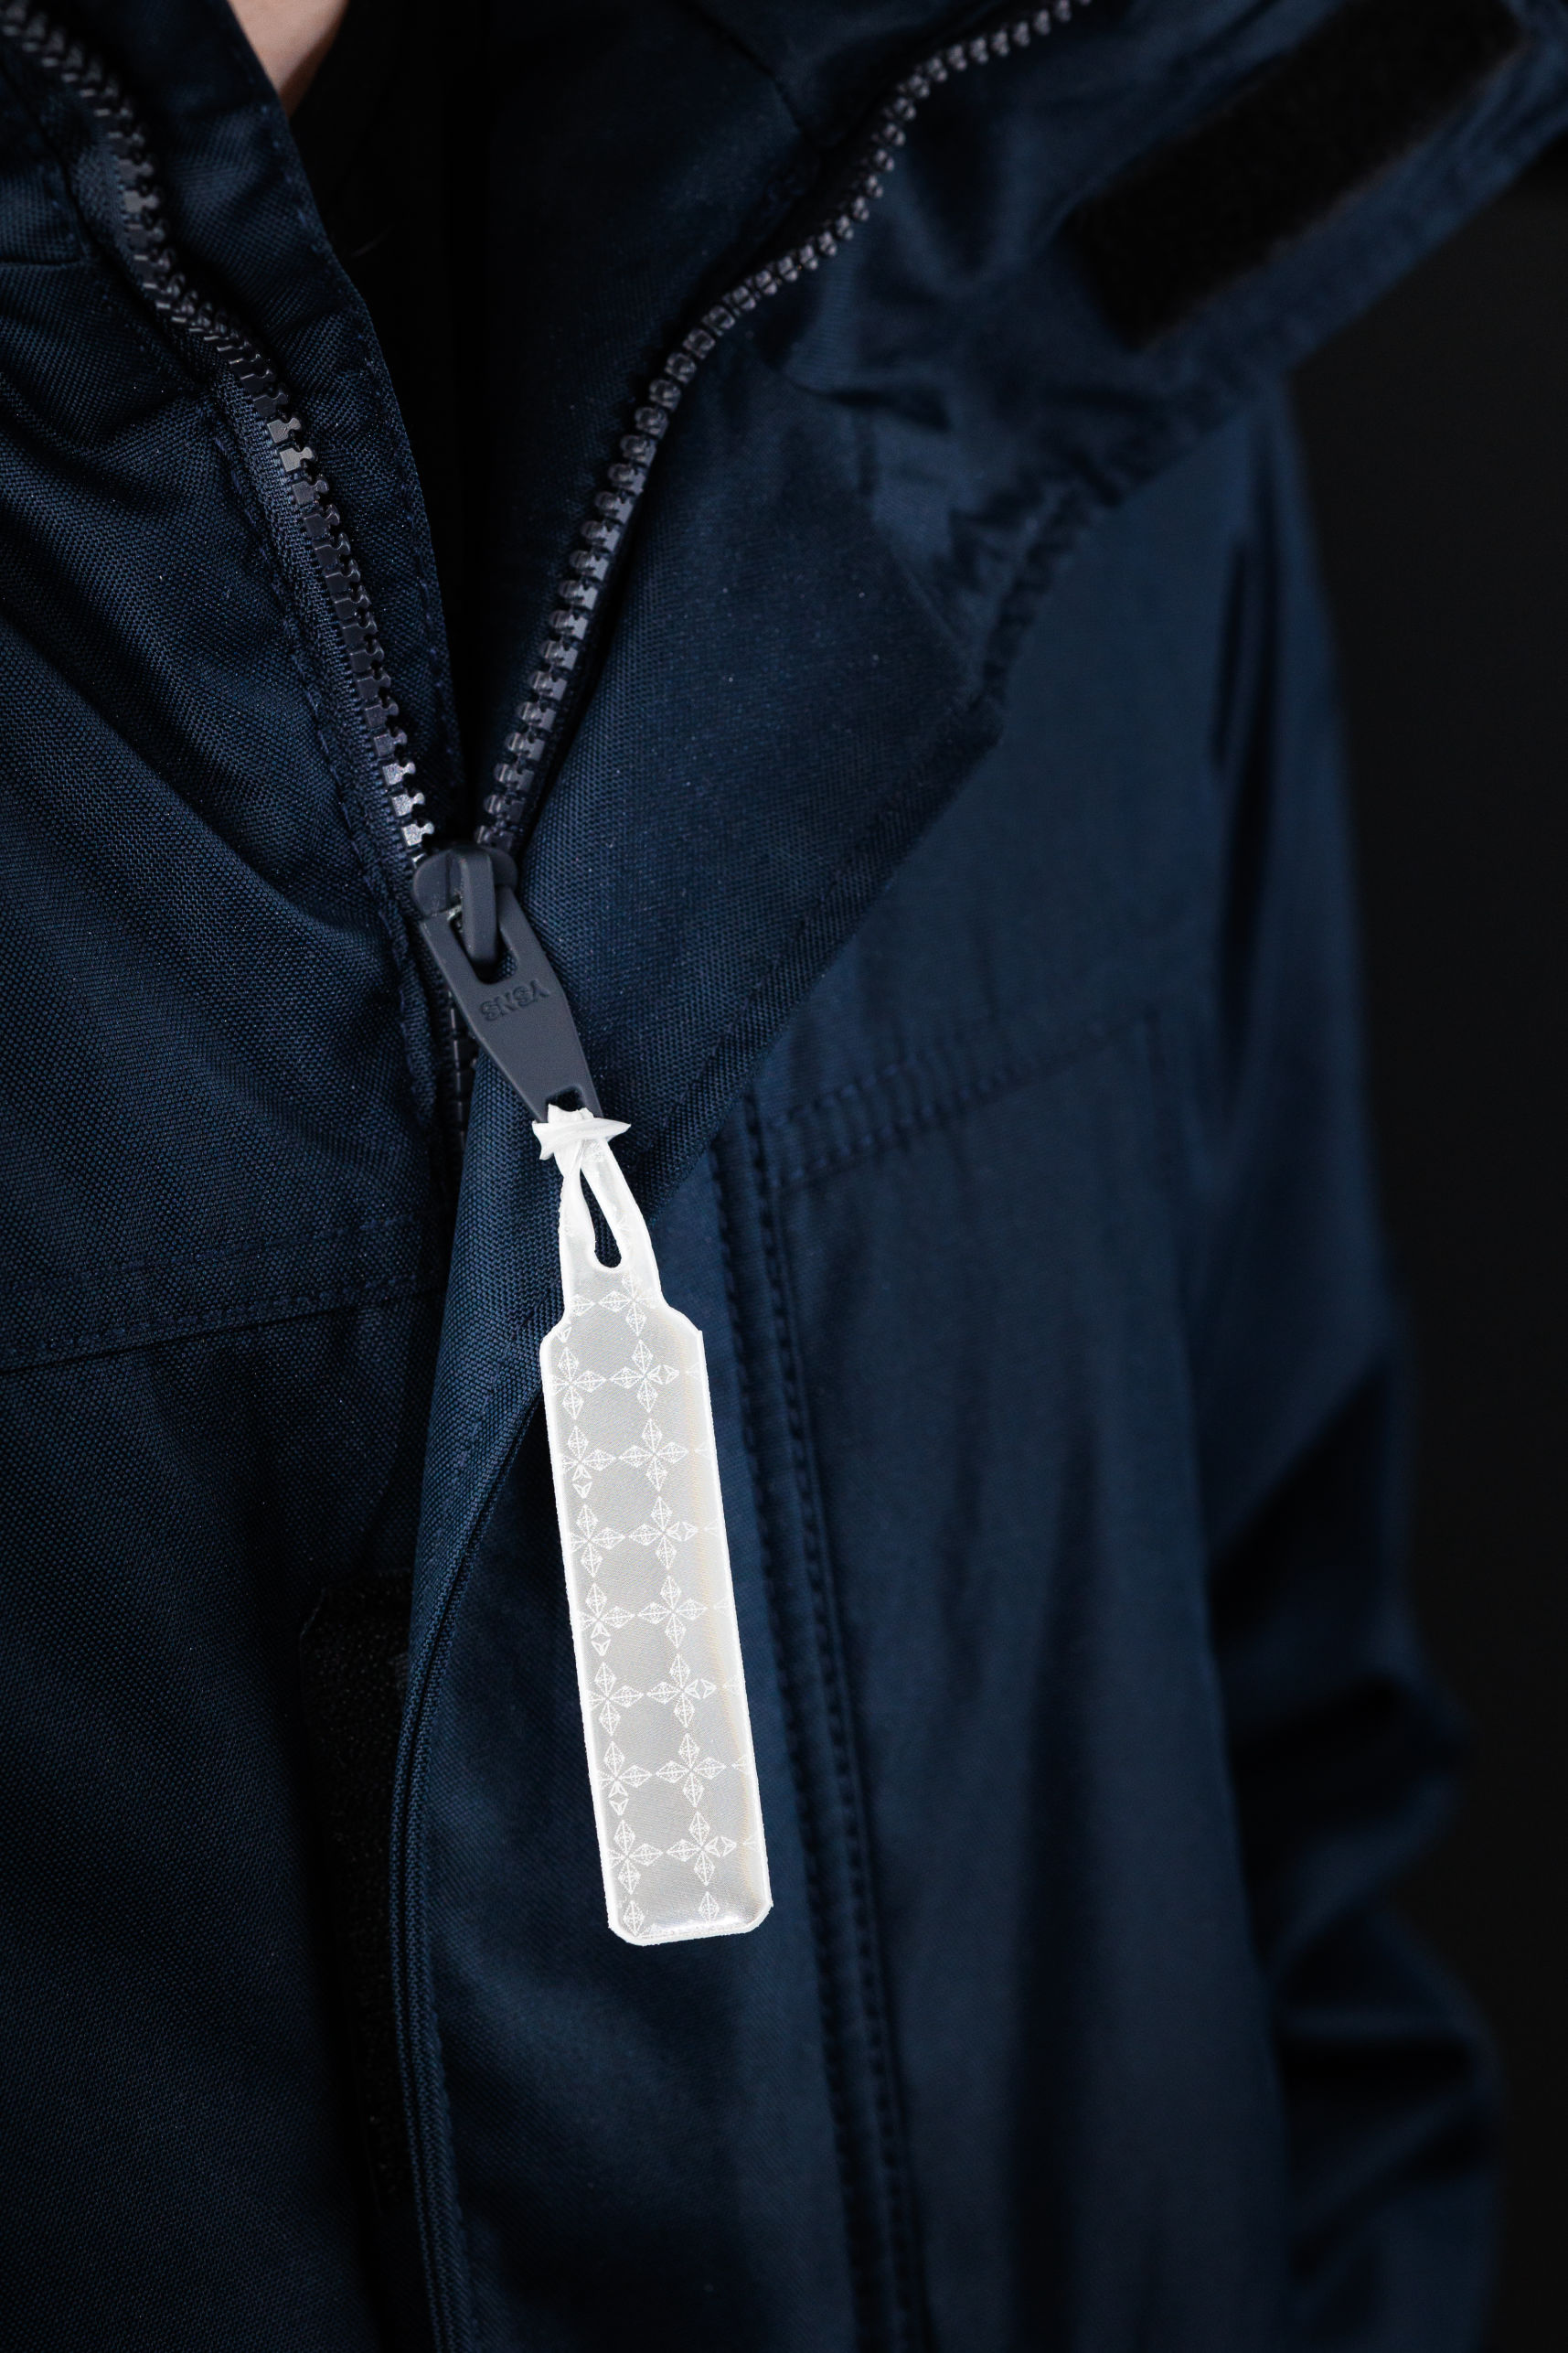 Jacket with reflective zip puller